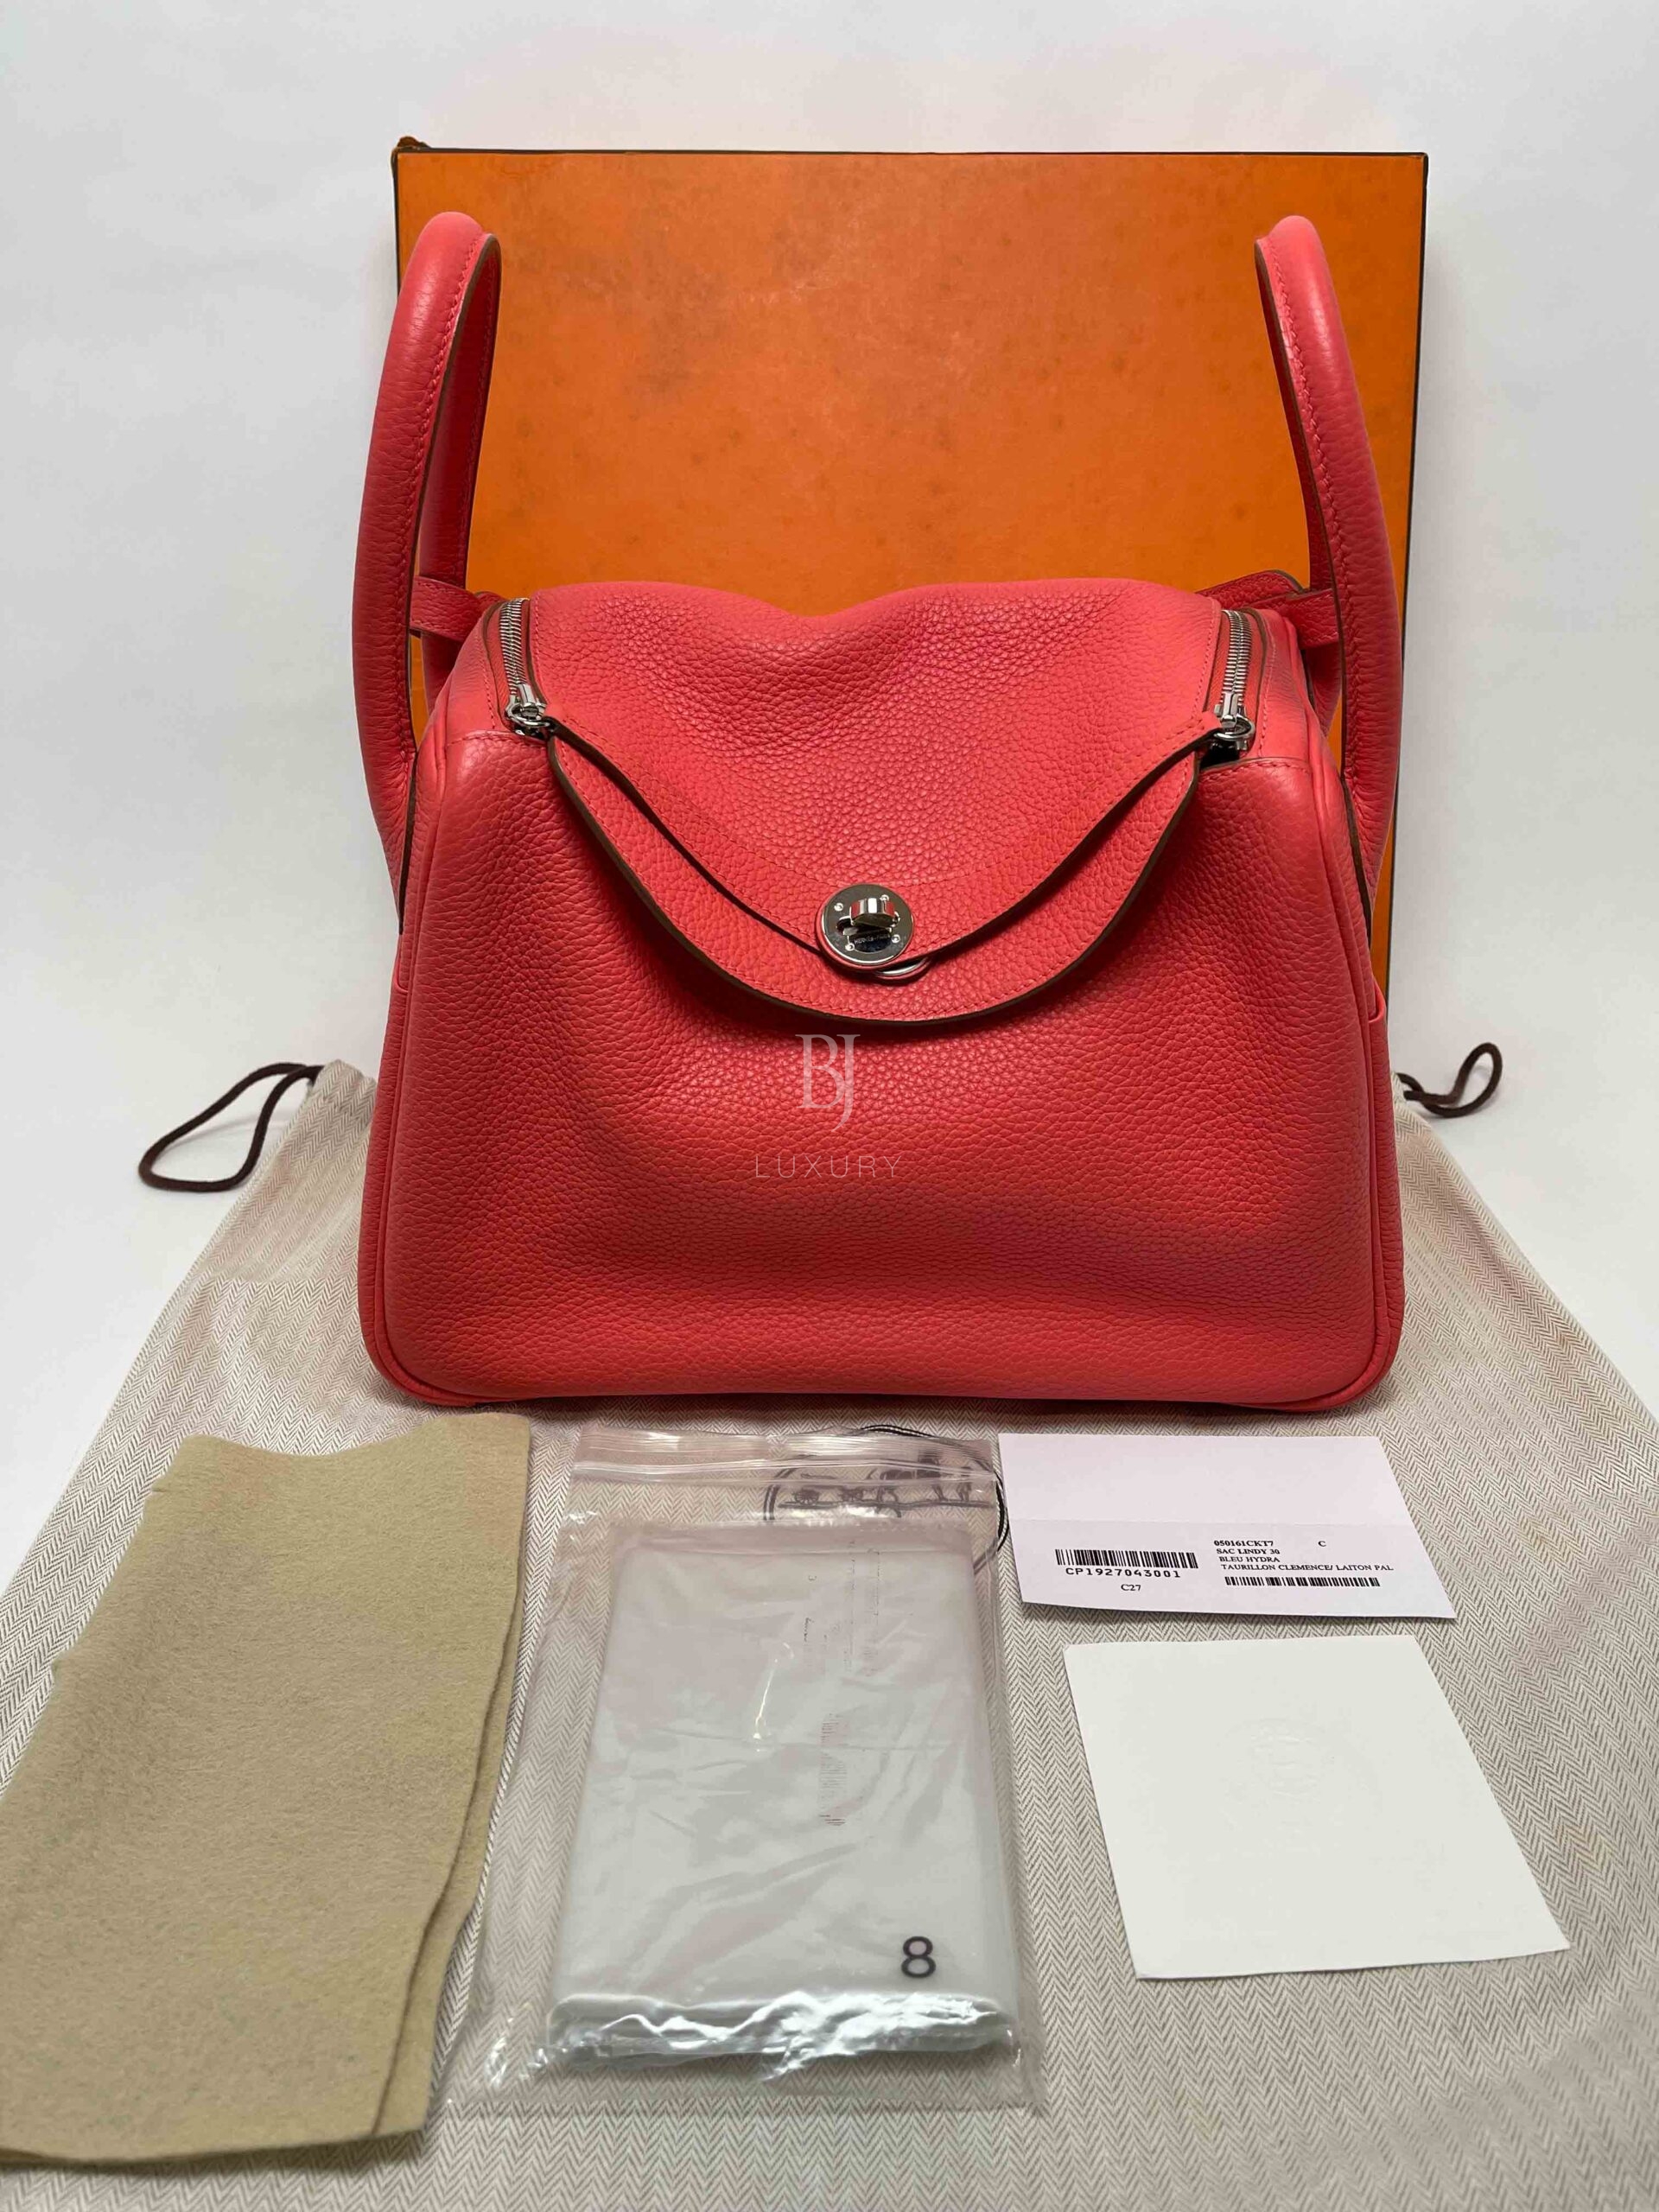 Hermes Lindy 30 in Rose Dragee - Selectionne PH